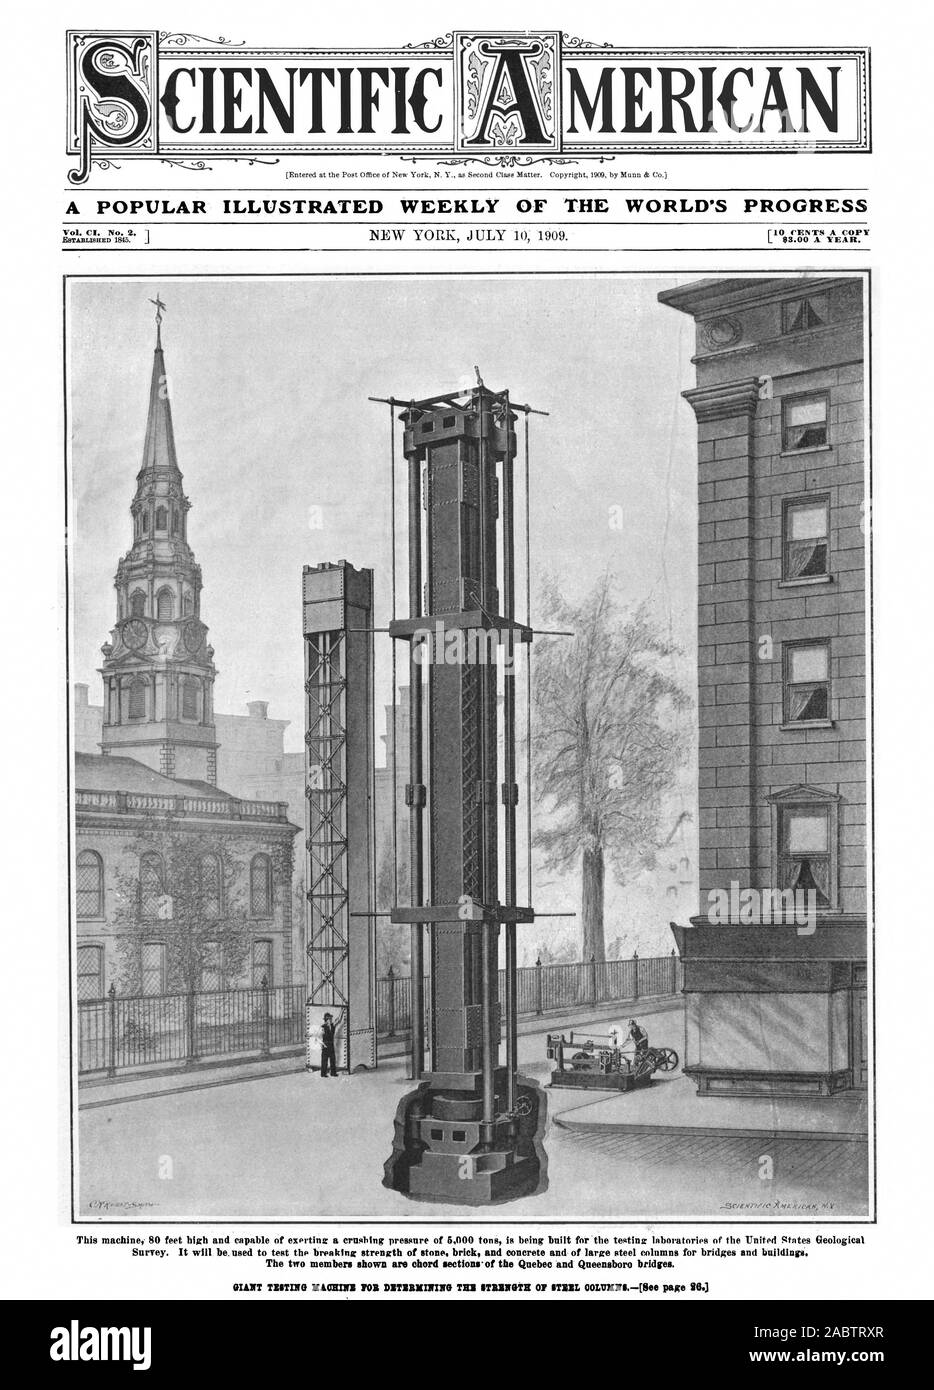 MERICA A POPULAR ILLUSTRATED WEEKLY OF THE WORLD'S PROGRESS GIANT TESTING MACHINE FOR DETERMINING THE STRENGTH OF STEEL COLUMNS, See page 6.3, scientific american, -1909-07-10 Stock Photo